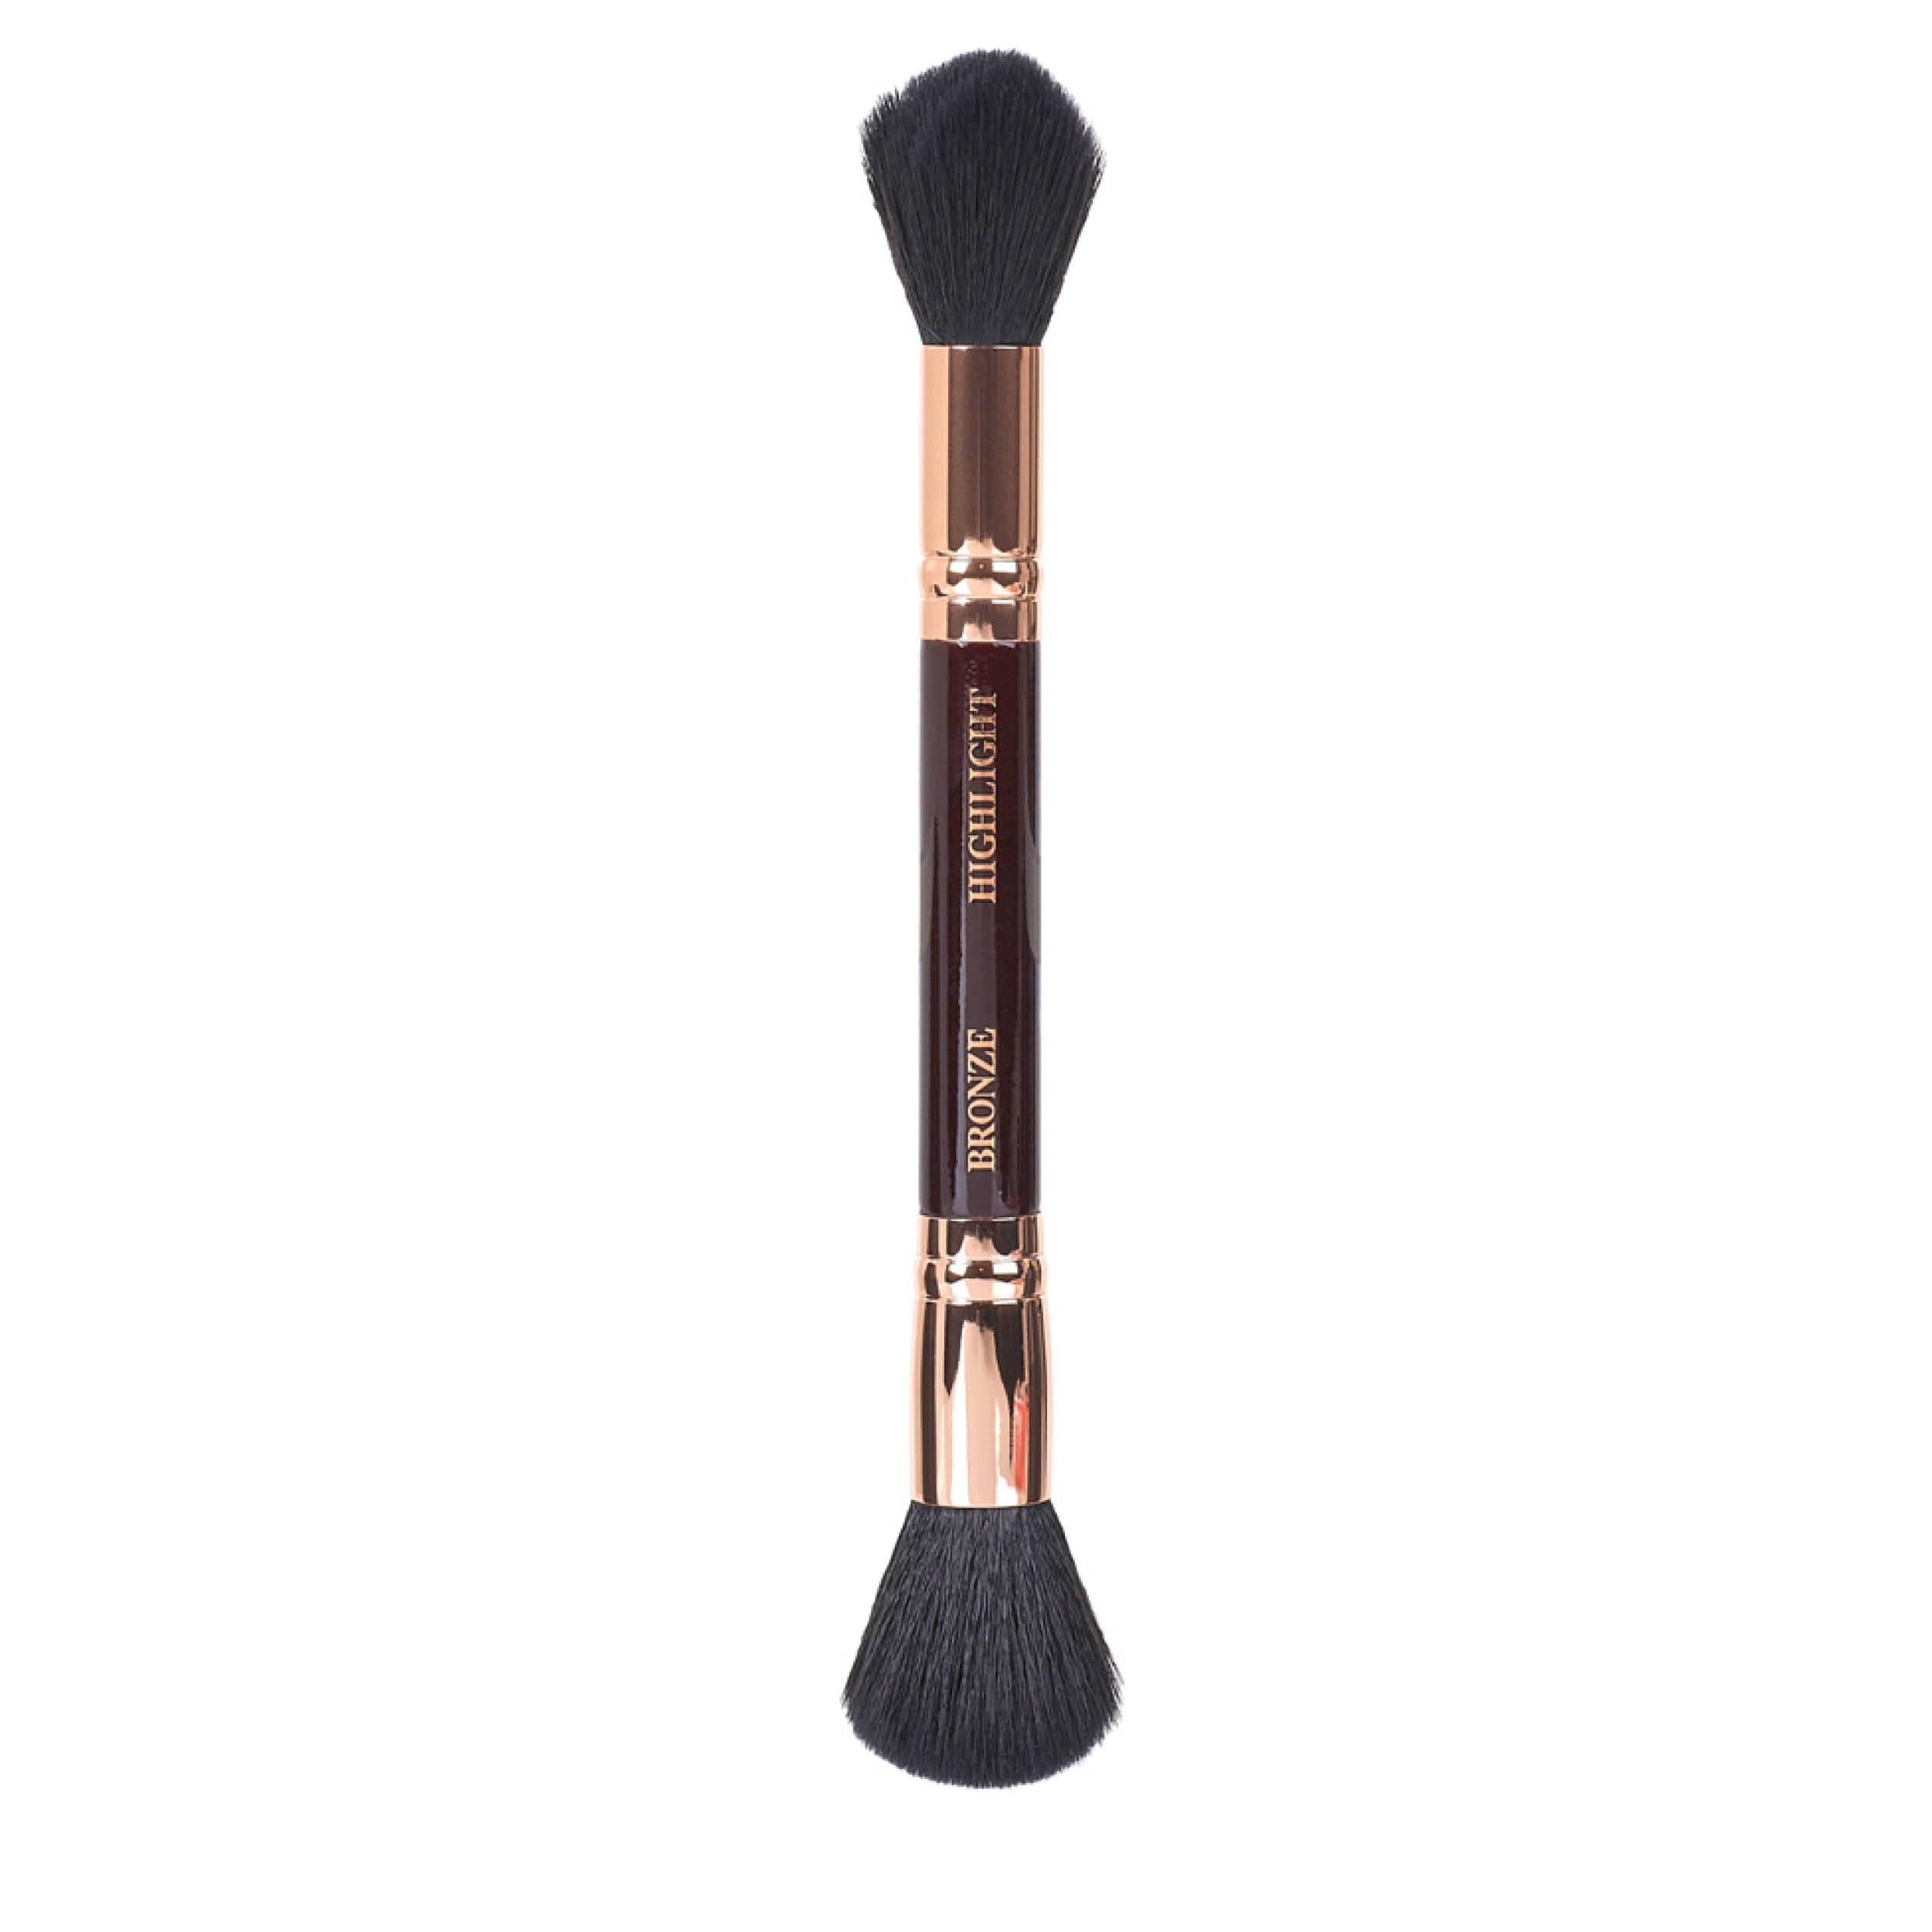 Sculpted by Aimee Connolly The Iconic Double Ended Sculpting Brush